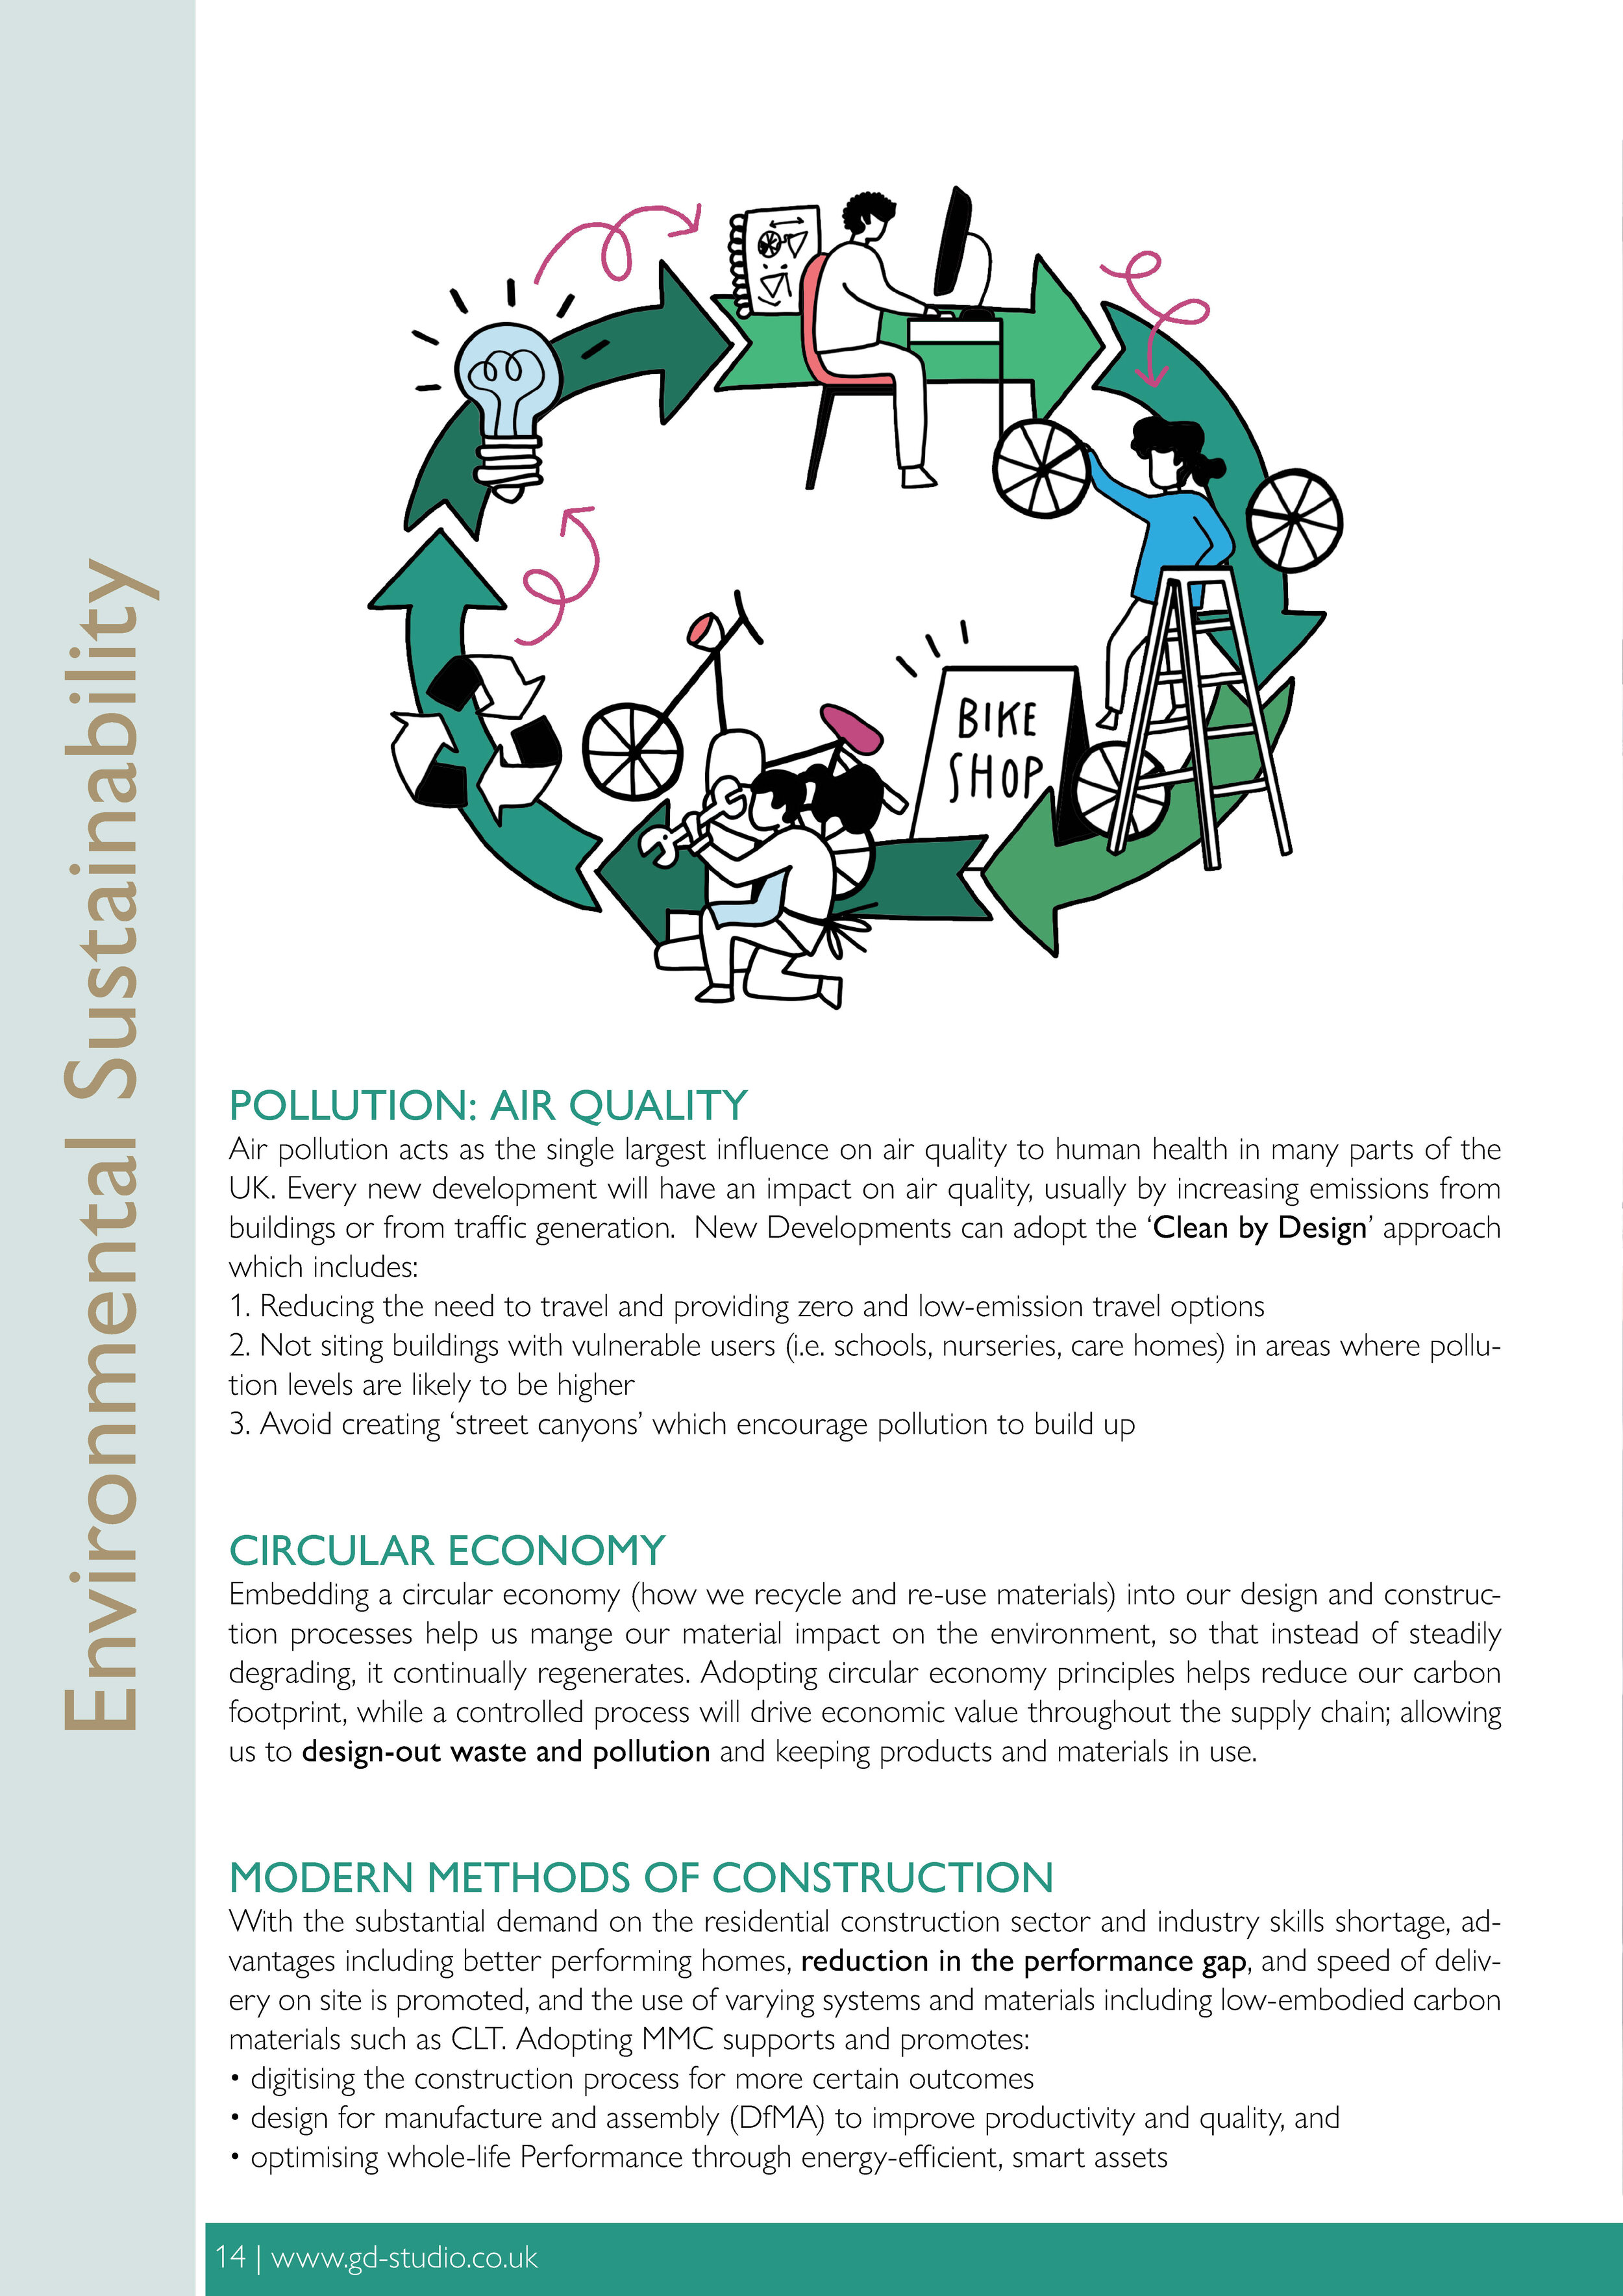 GDS Clients Guide to Sustainability-14.jpg